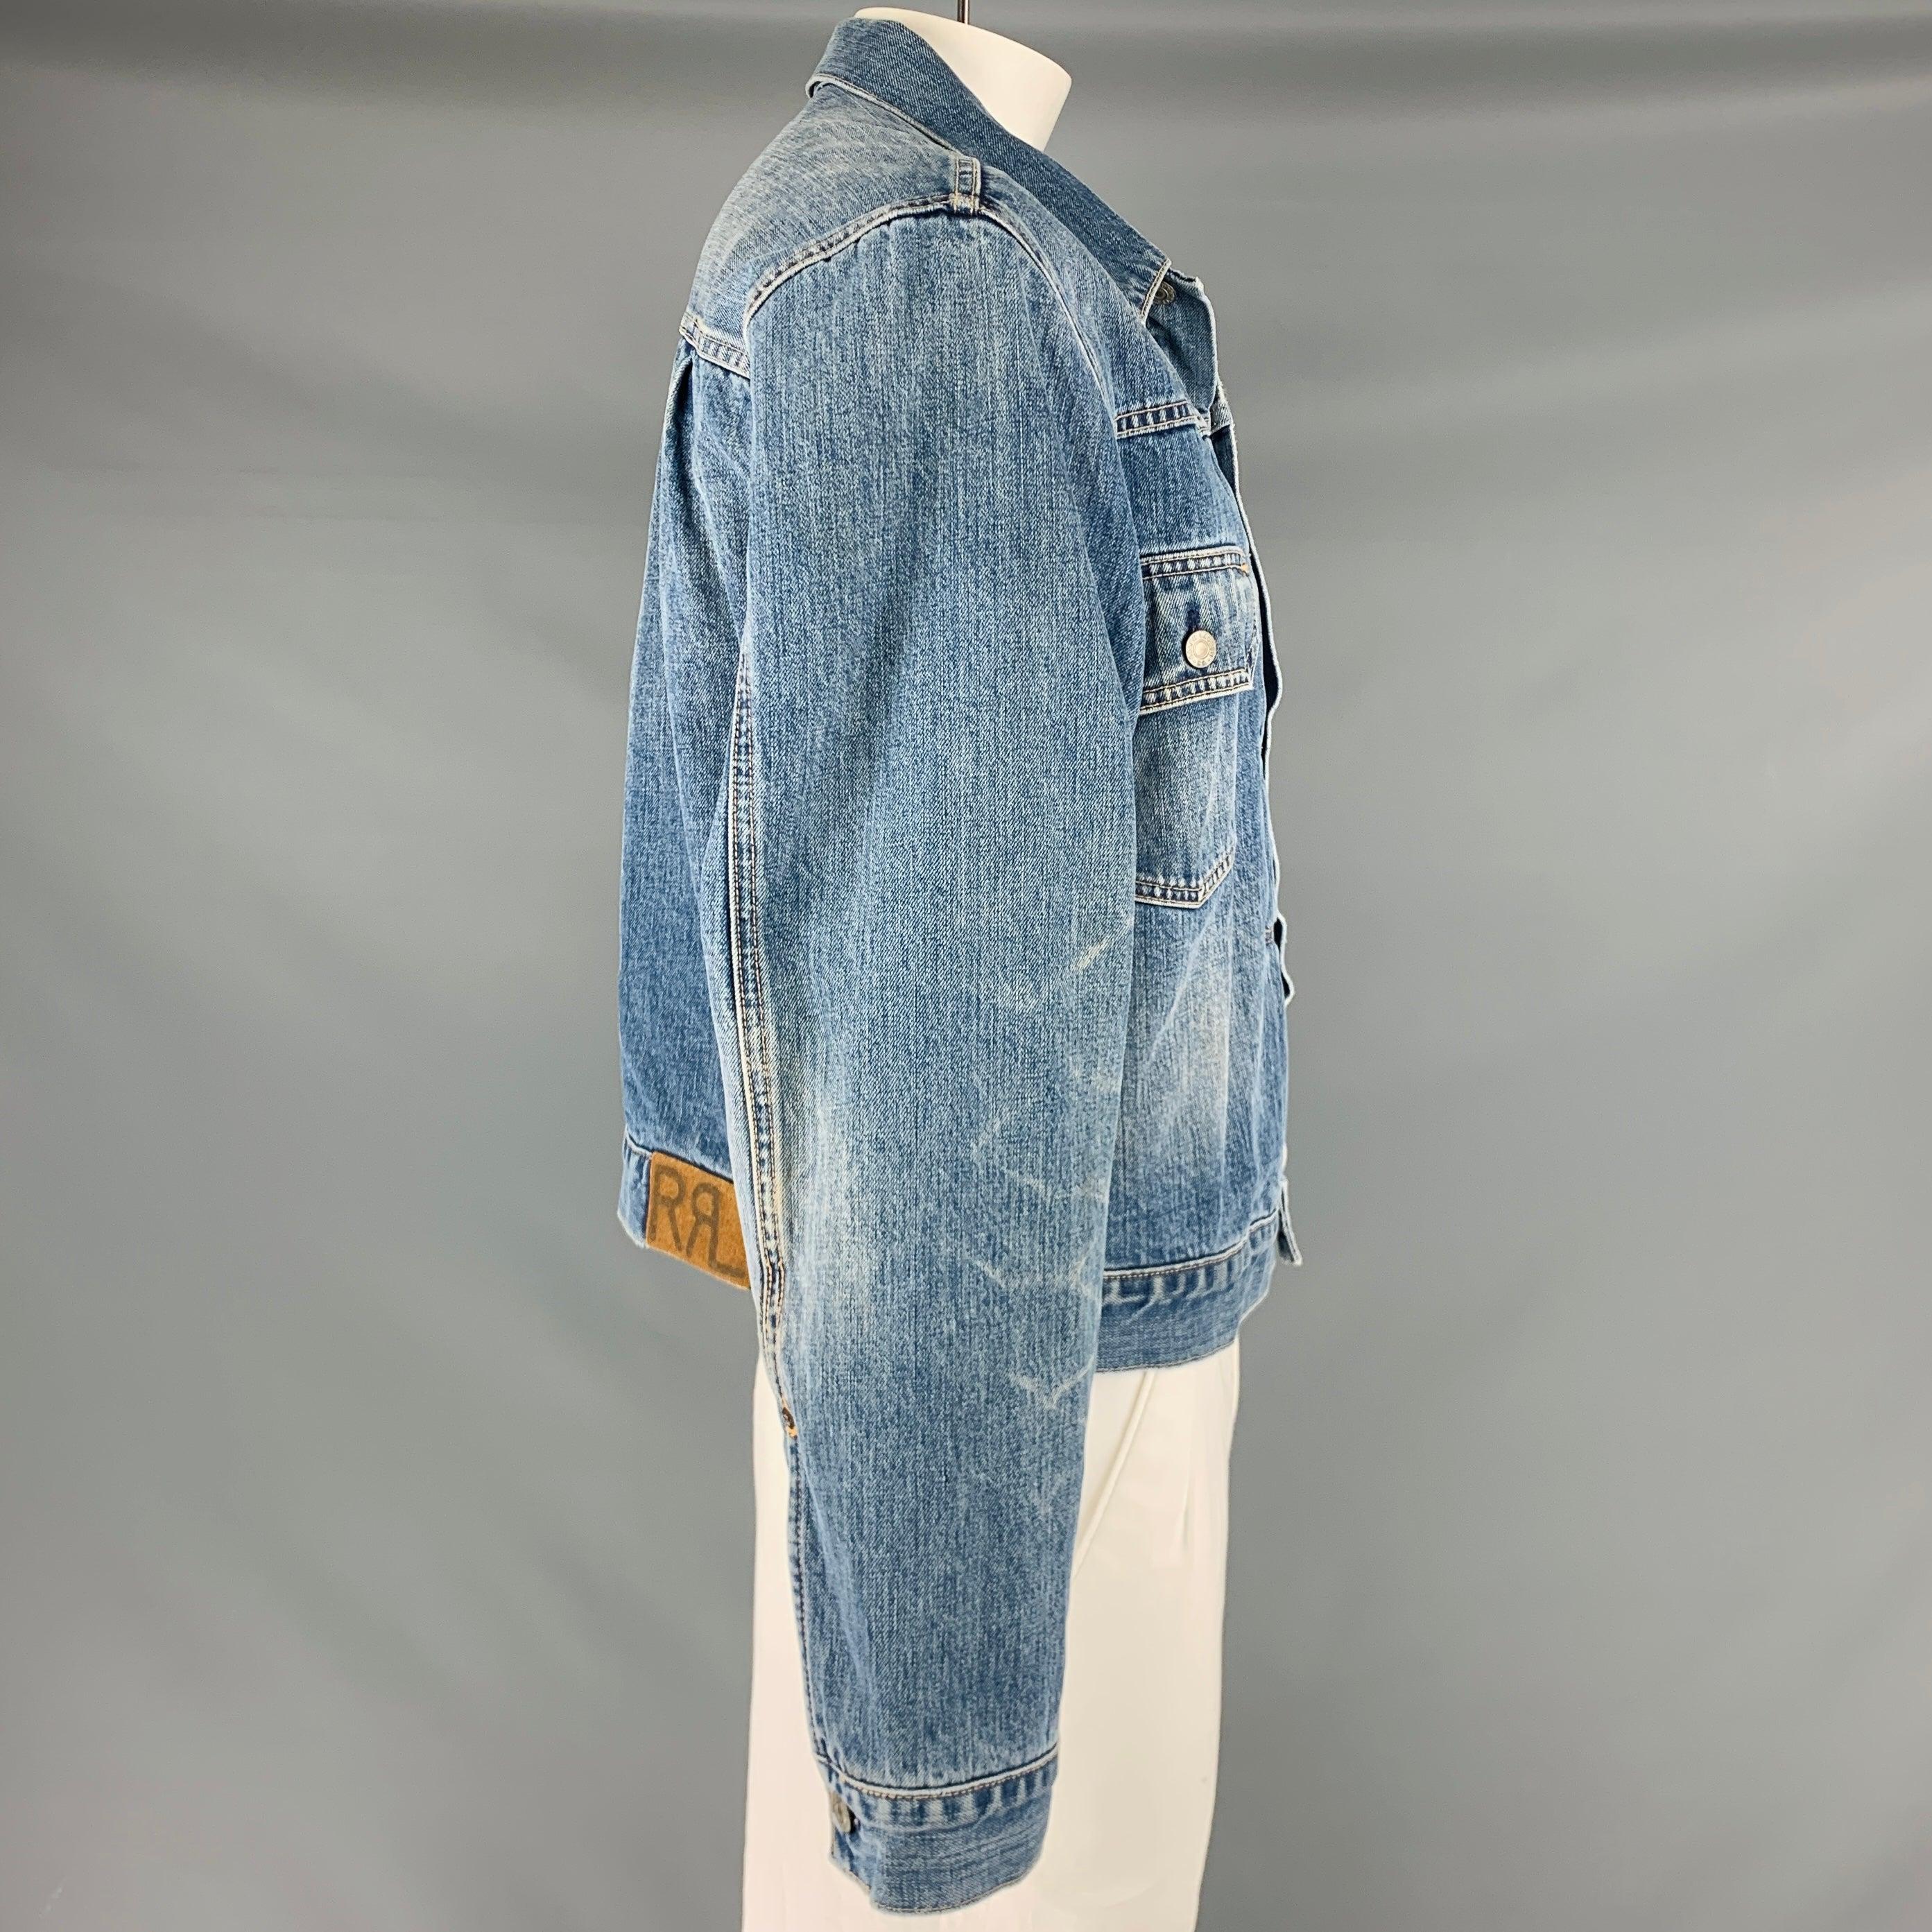 RRL by RALPH LAUREN jacket
in a blue wash denim fabric featuring a trucker style, plaid lining, two patch pockets, and a button closure. Very Good Pre-Owned Condition. Minor signs of wear. 

Marked:   XL 

Measurements: 
 
Shoulder: 19.5 inches